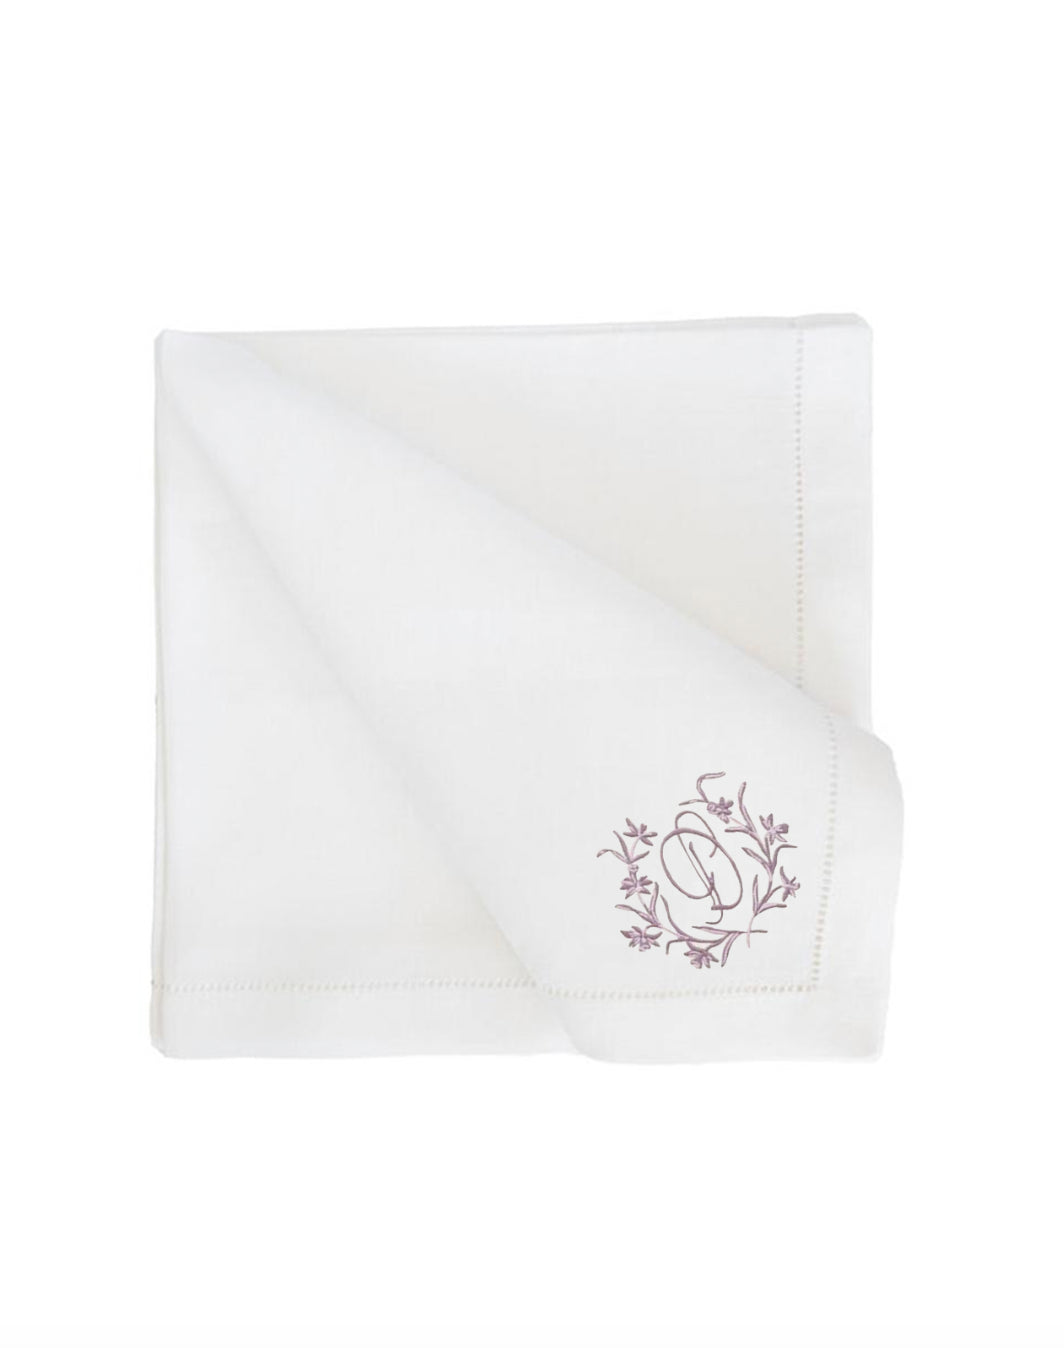 Personalized & Embroidered Festival Dinner Napkins, Set of 4